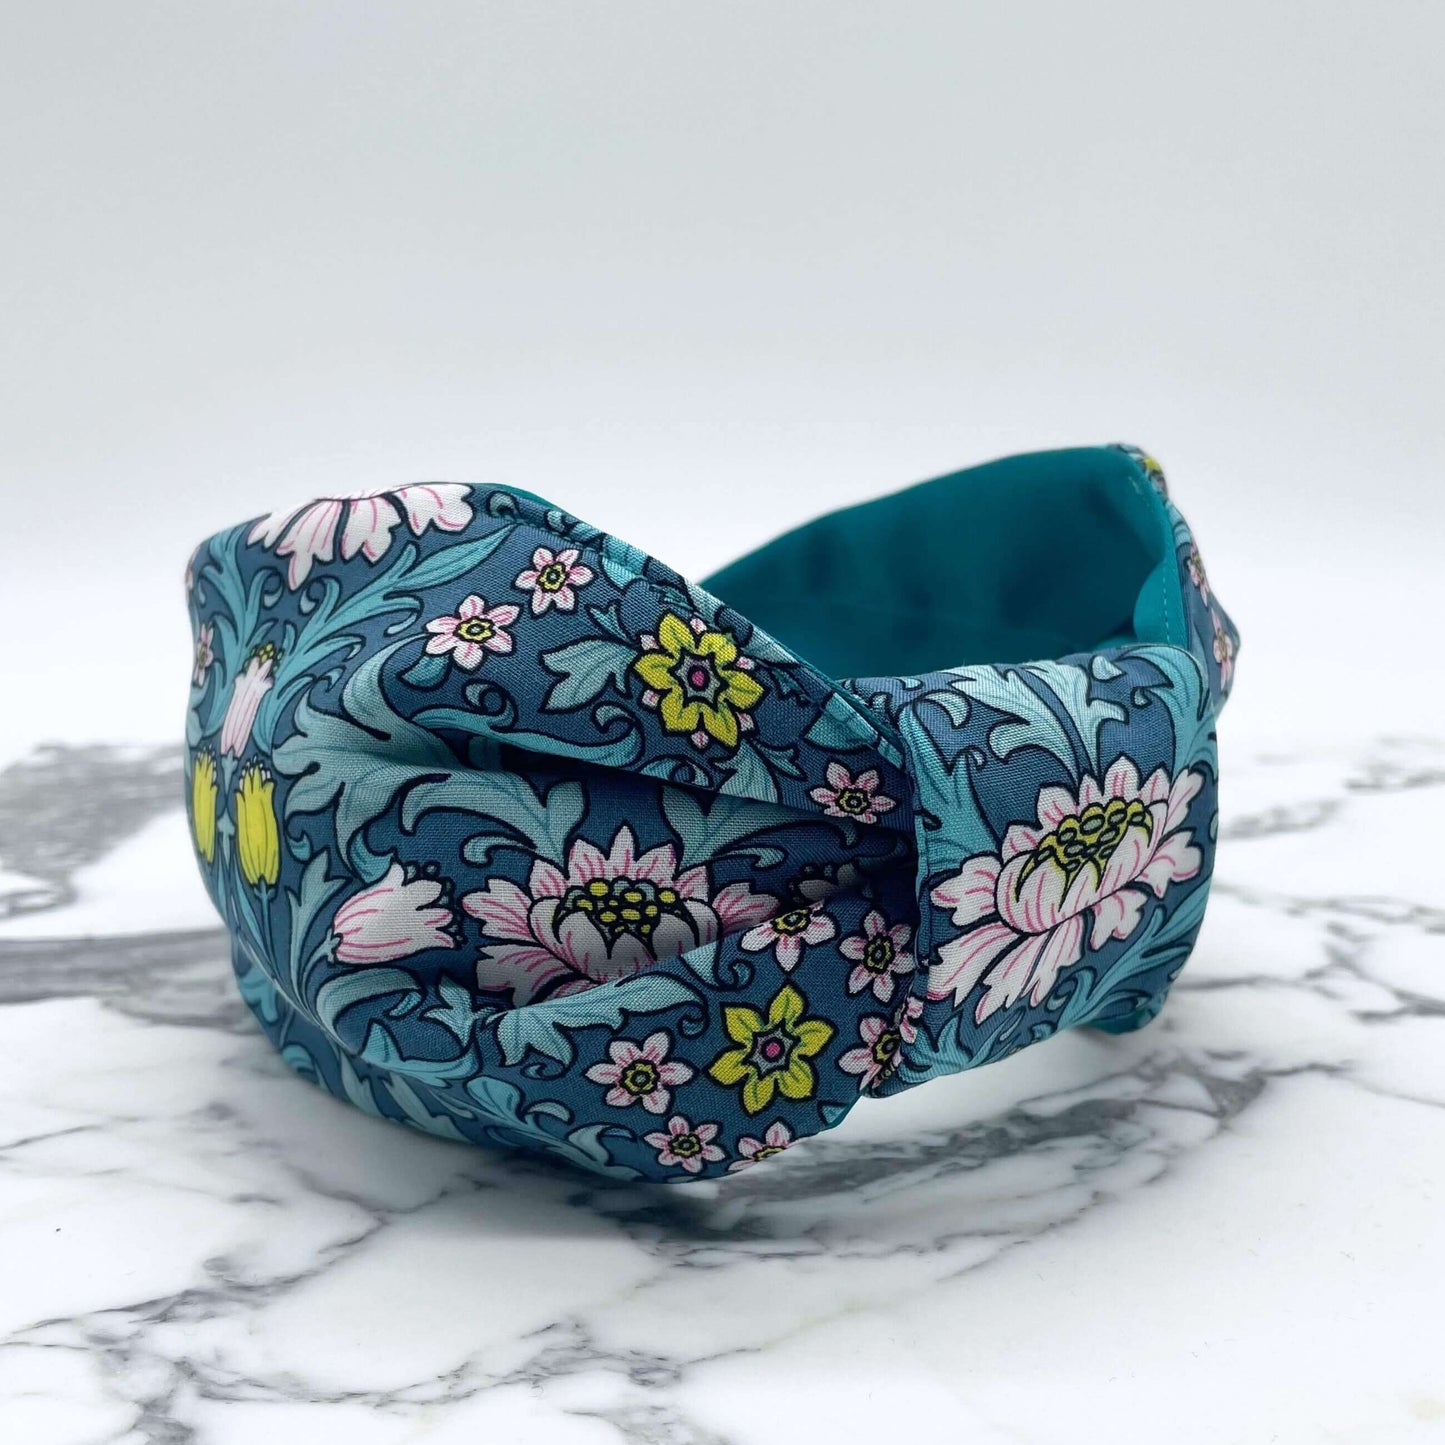 William Morris- Inspired Knot Headband with satin lining in blue. Flowers and leaves print